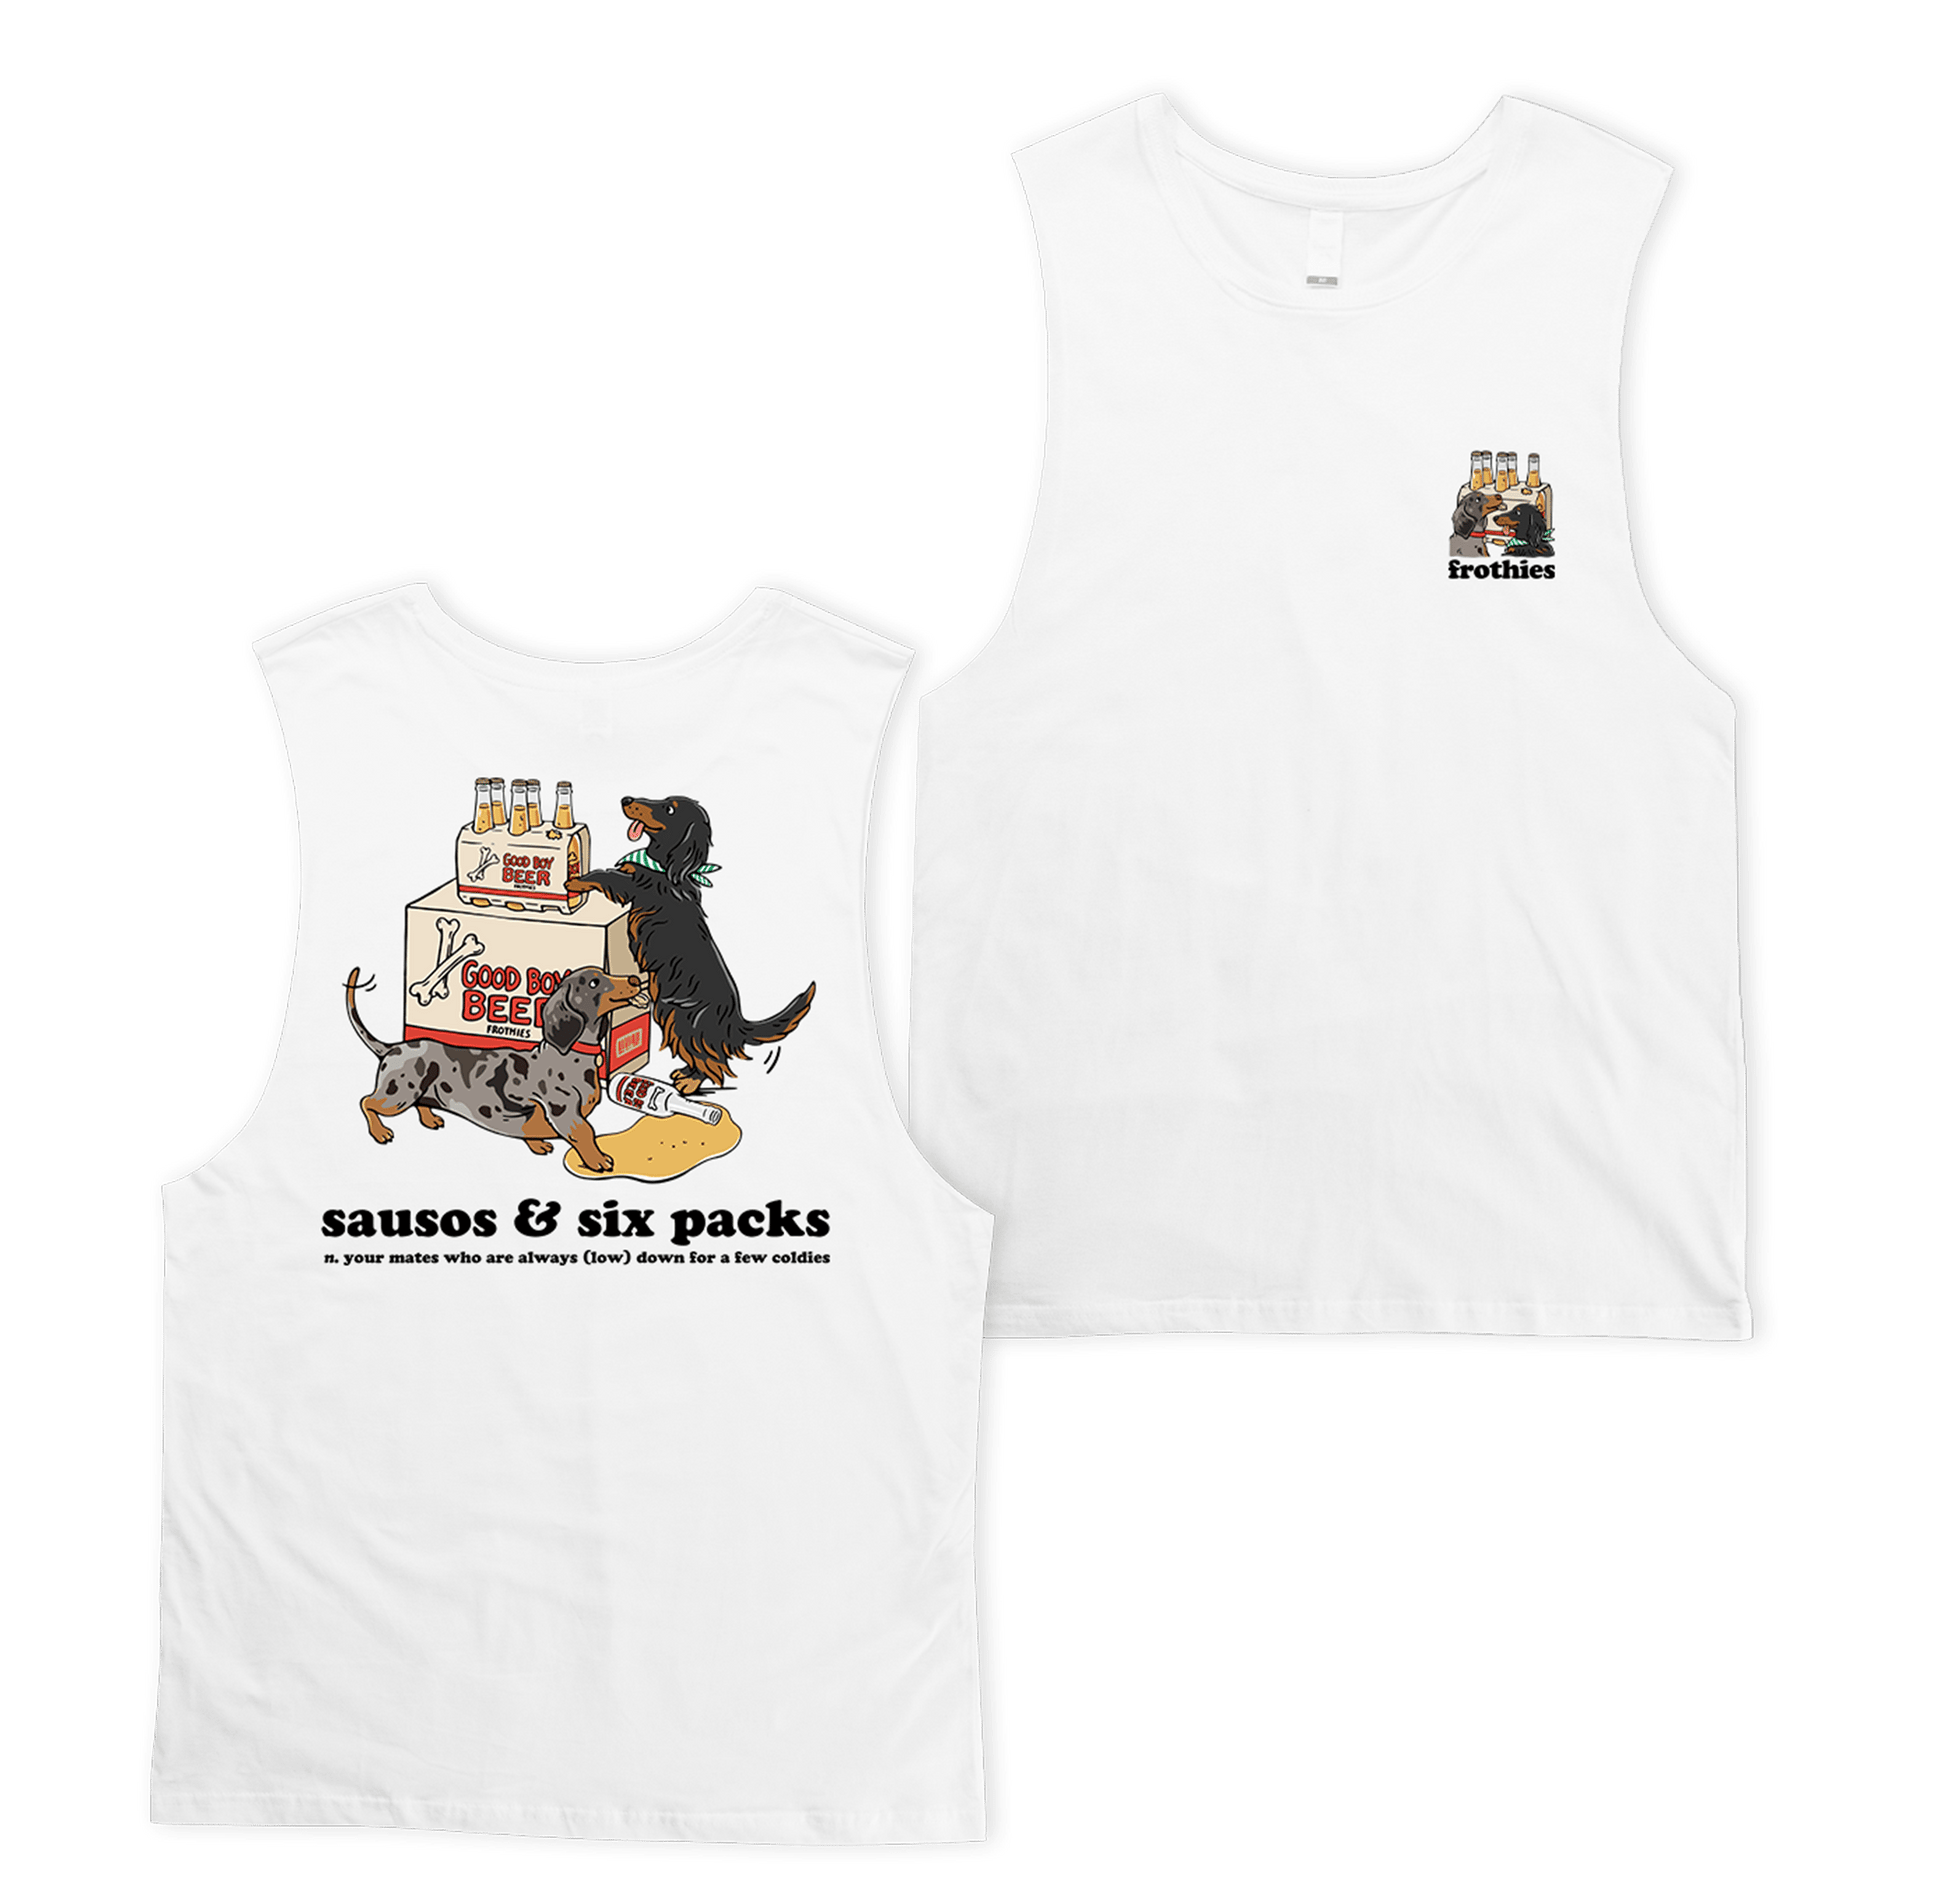 Sausos & Six-Packs Muscle Tee T-Shirt Frothies